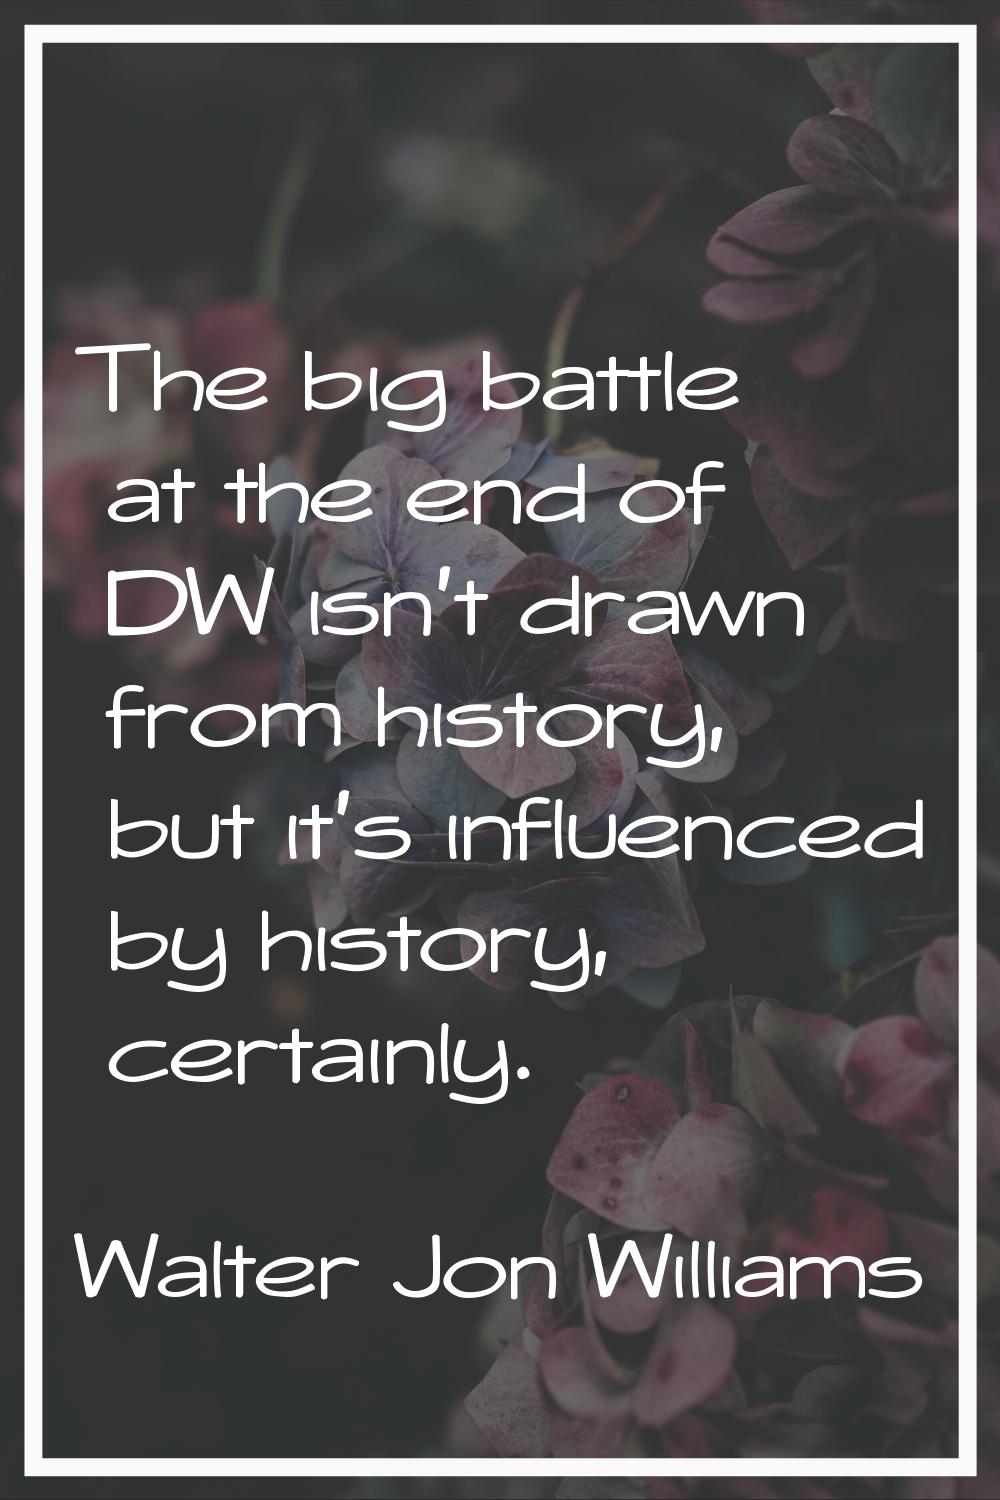 The big battle at the end of DW isn't drawn from history, but it's influenced by history, certainly